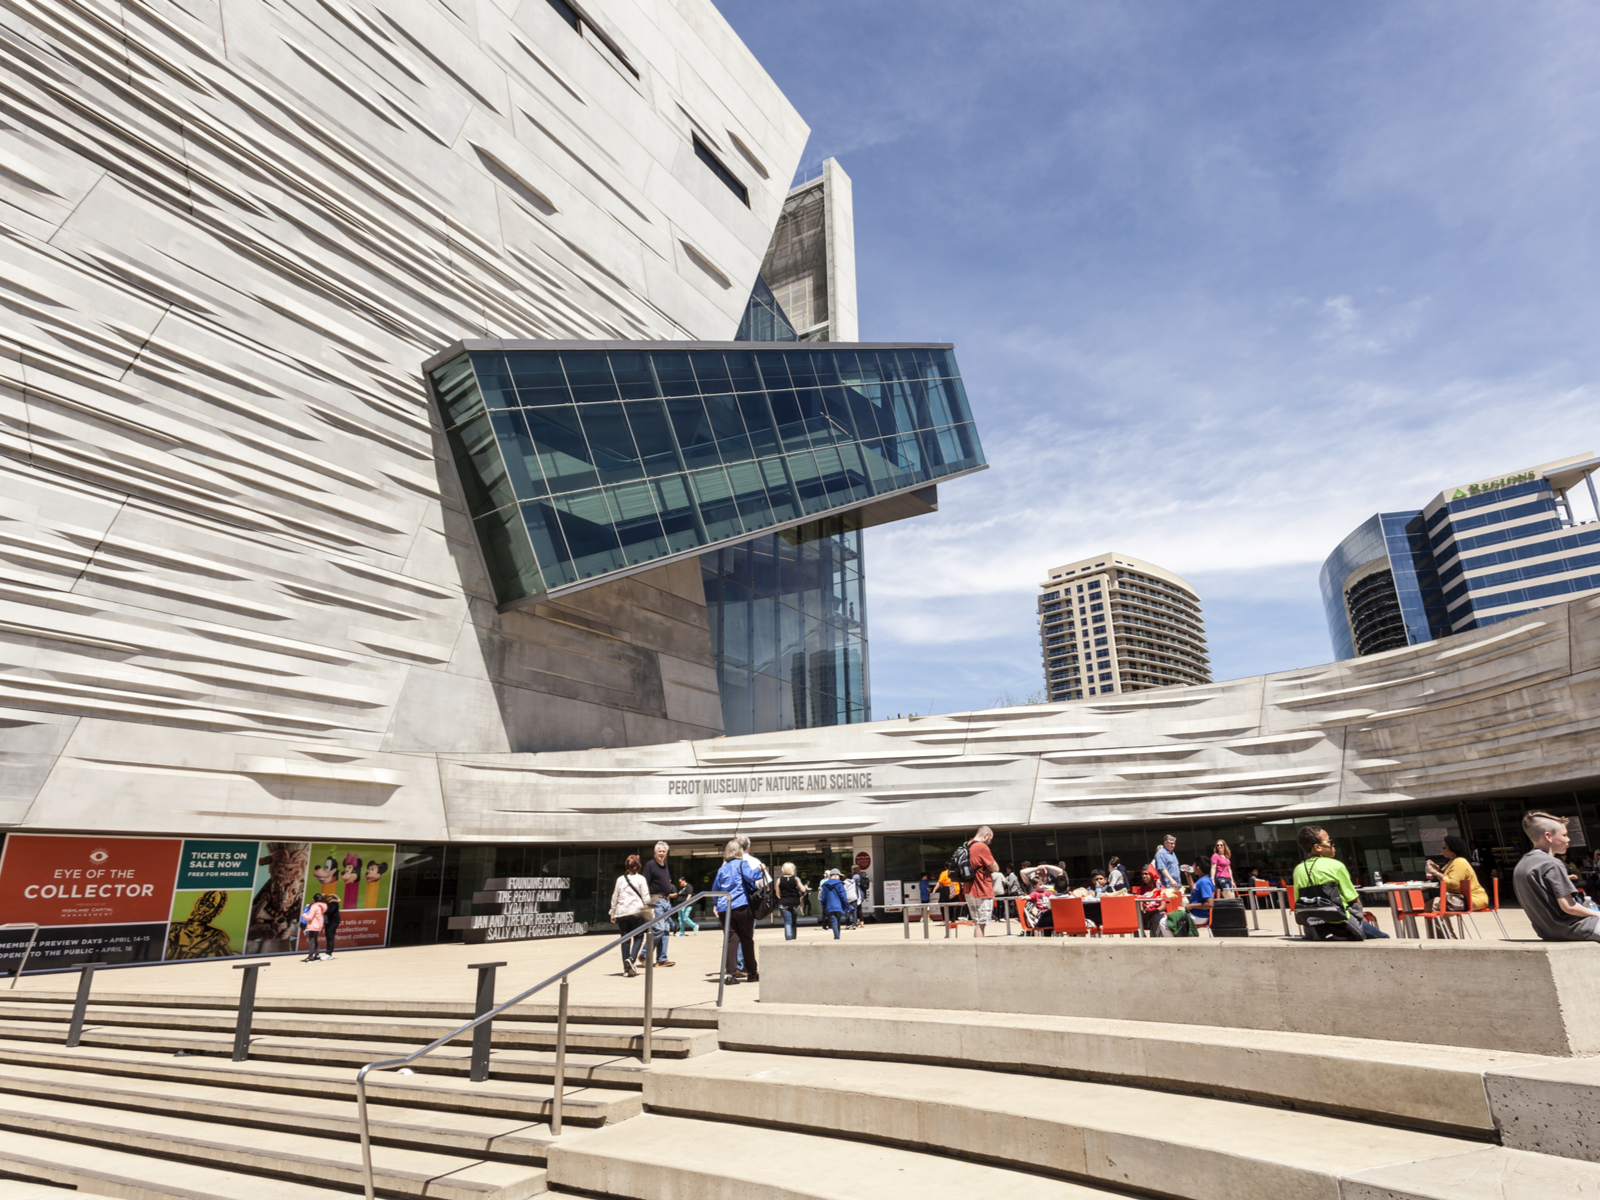 Perot Museum of Nature and Science, one of the best things to do in Dallas